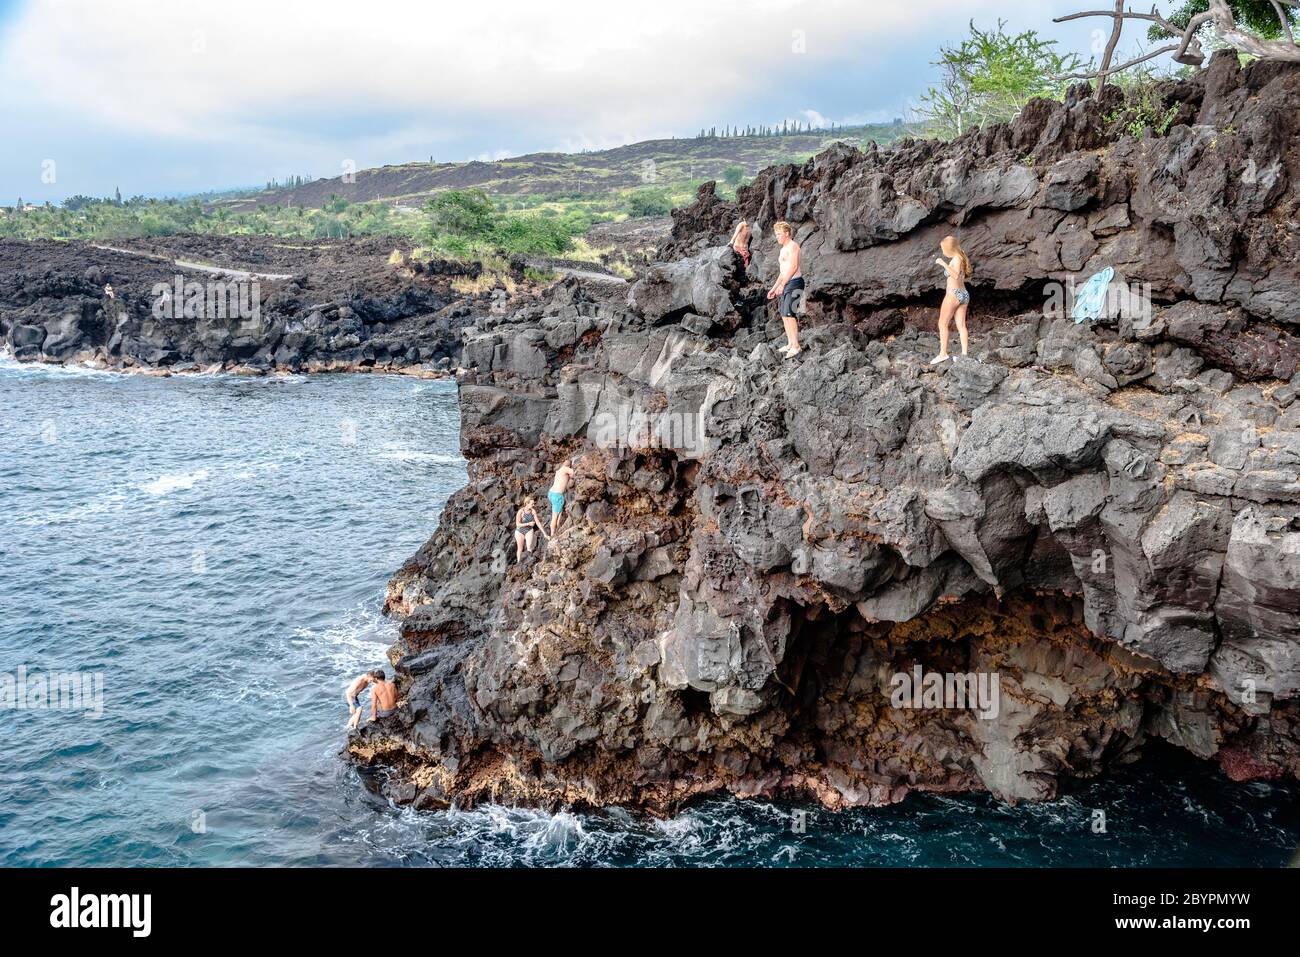 People cliff jumping into Keauhou Bay at the End of the World on the Big Island of Hawaii Stock Photo